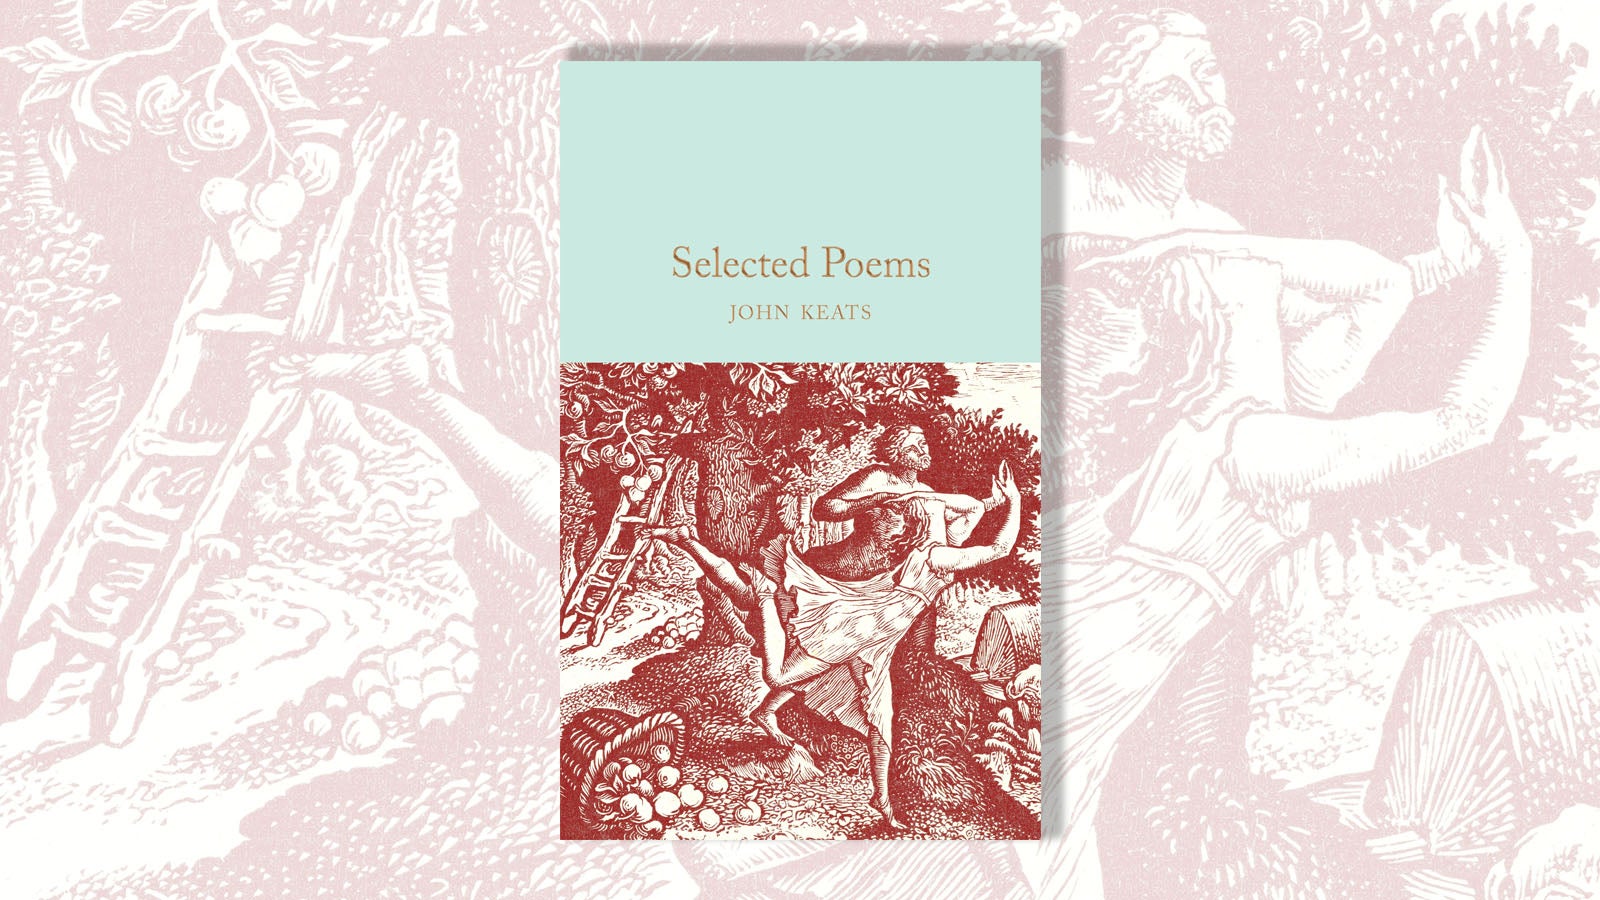 Book cover of John Keats's selected poems on the background of a woodland illustraton